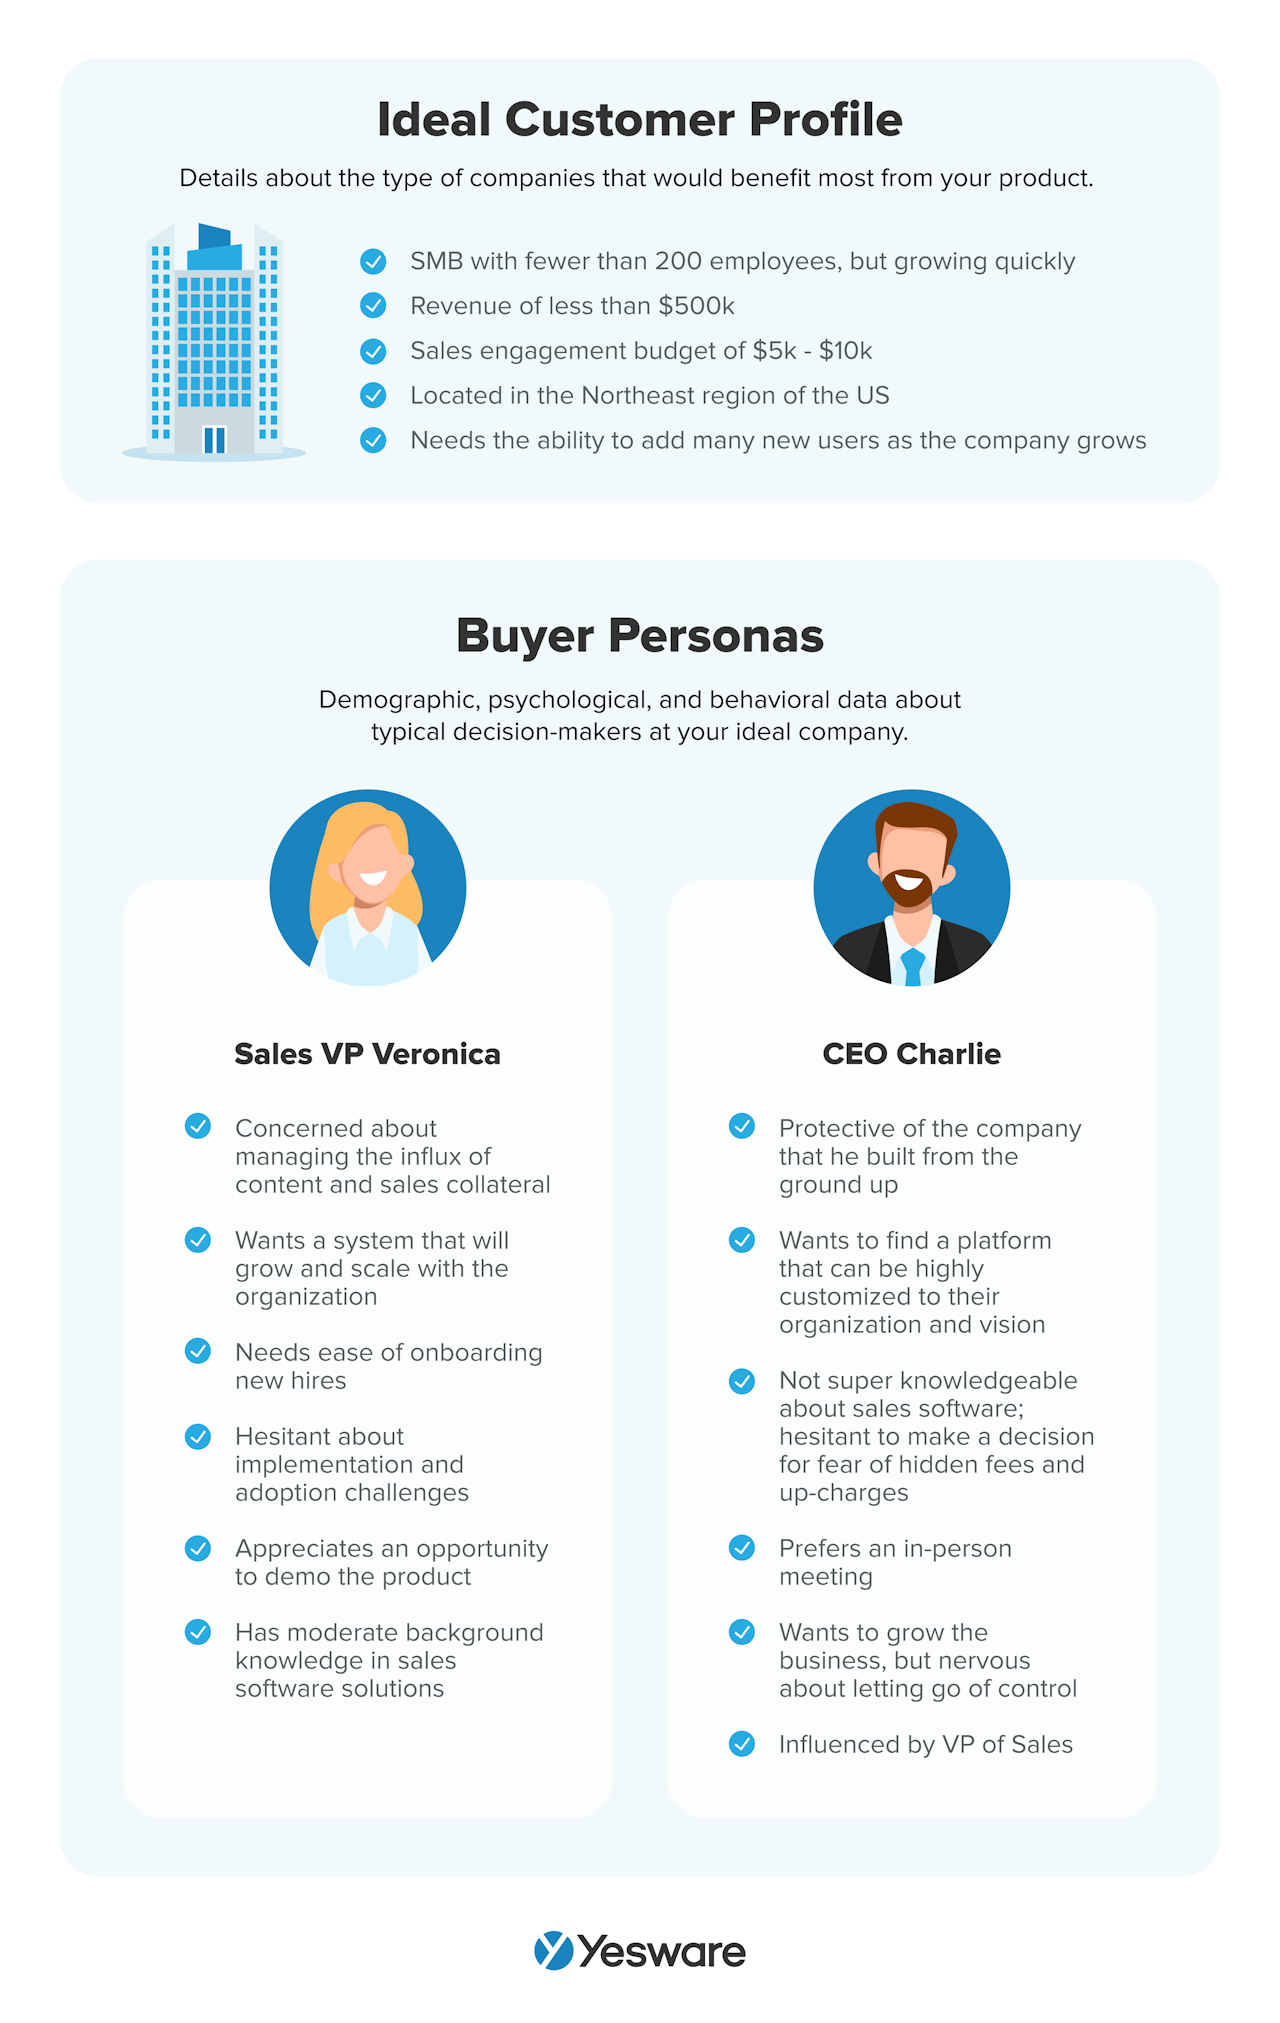 lead scoring firmographic model: ideal customer profile and buyer personas